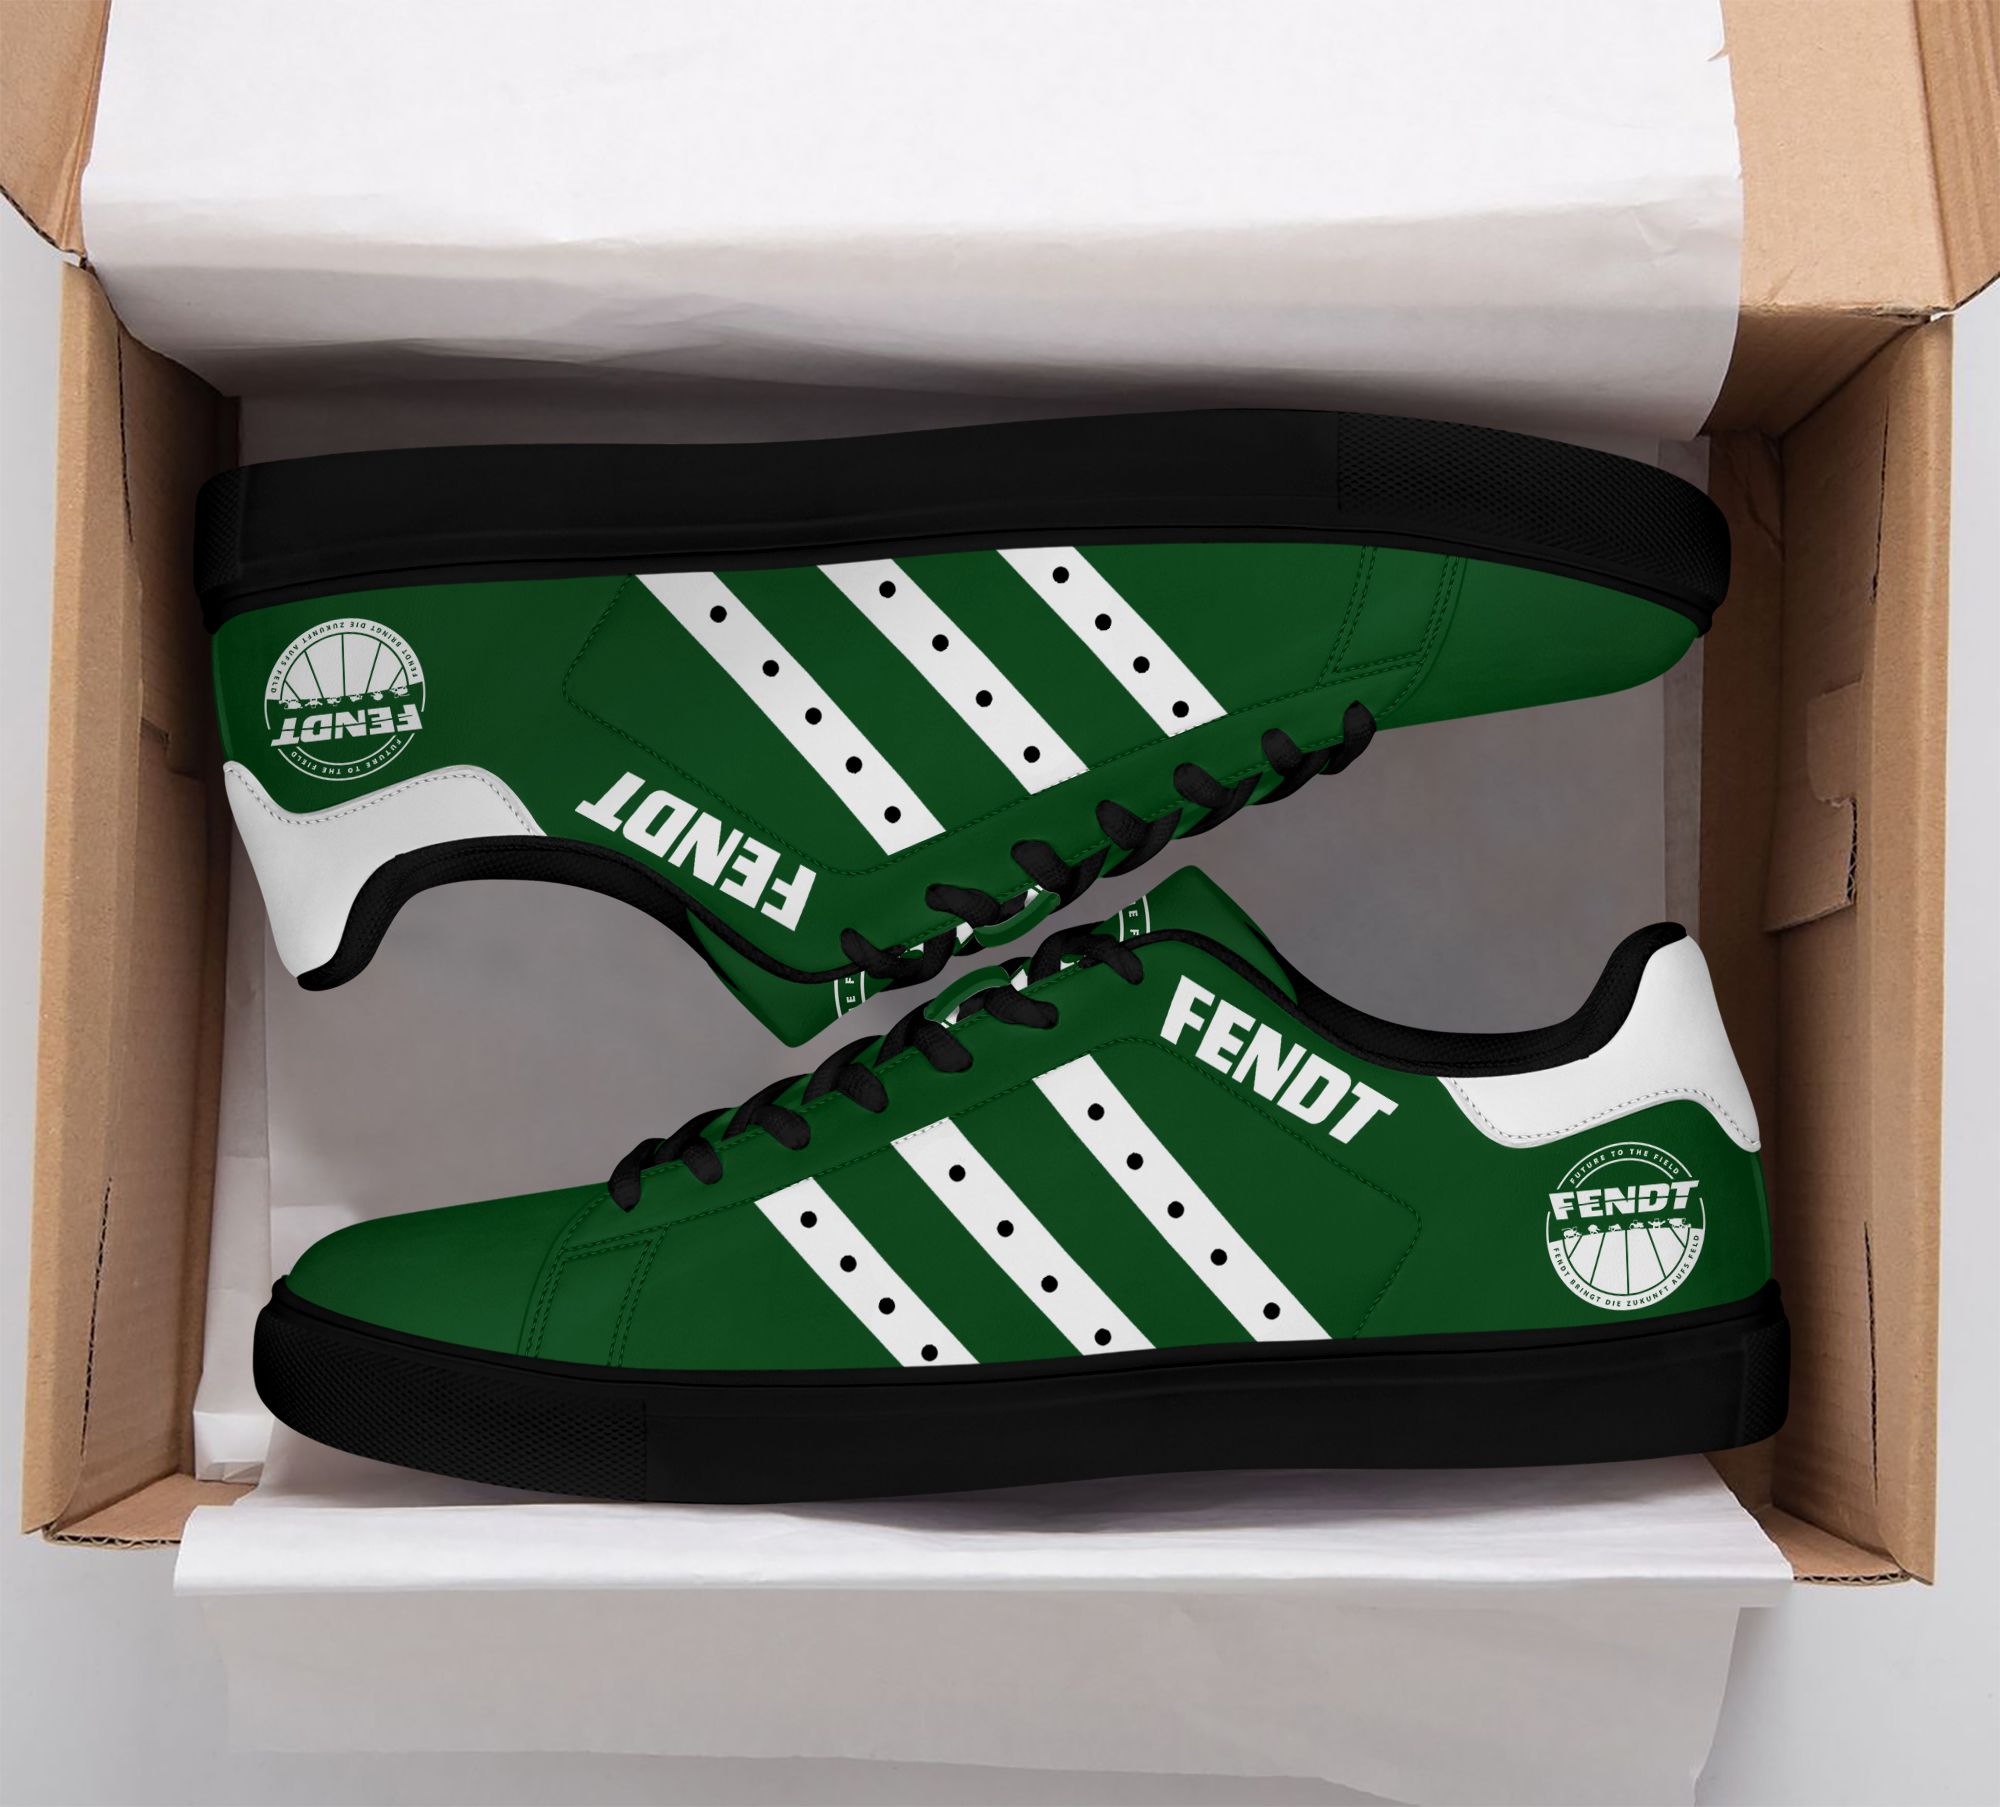 [NEW] Fendt green and white Stan Smith Shoes Sneaker |HOT IN NORTH AMERICA